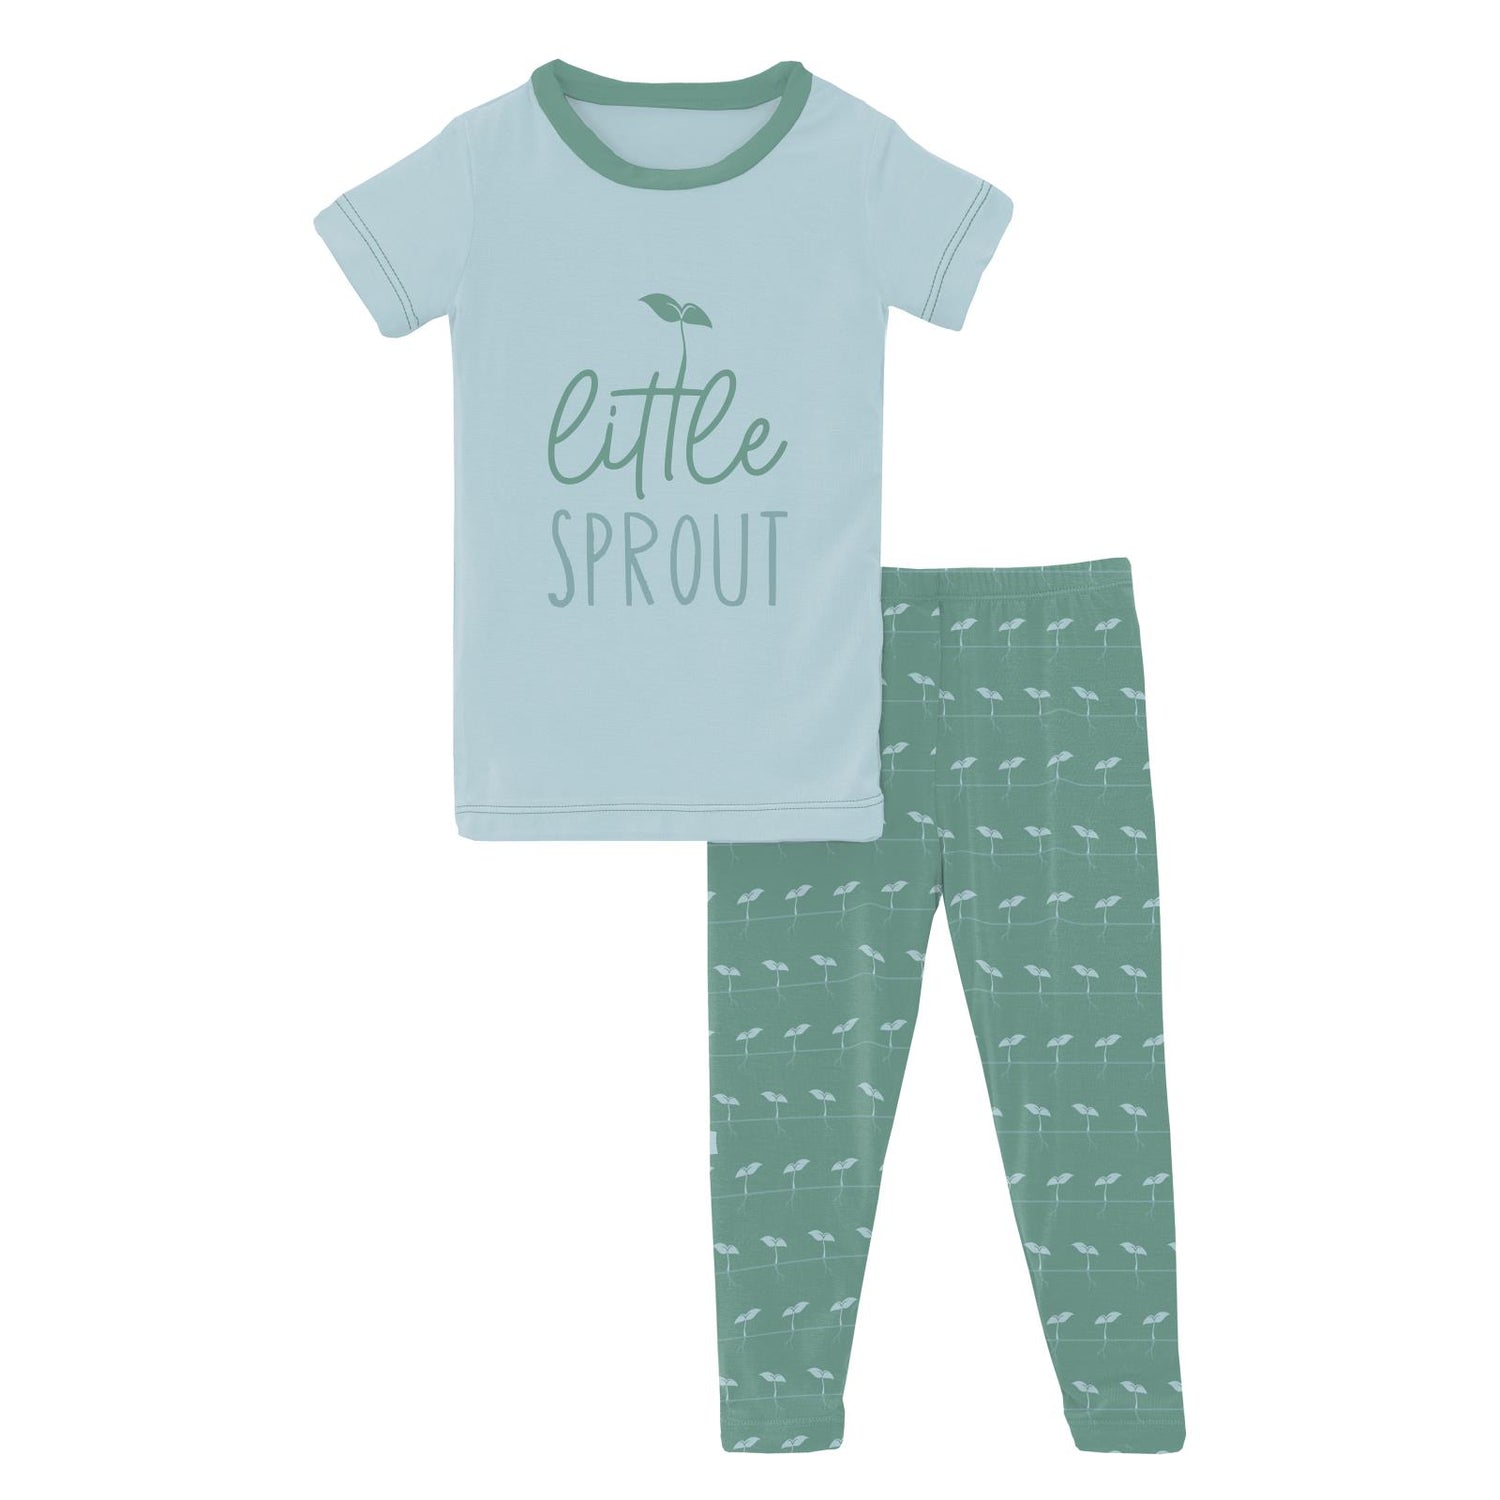 Short Sleeve Graphic Tee Pajama Set in Shore Sprouts